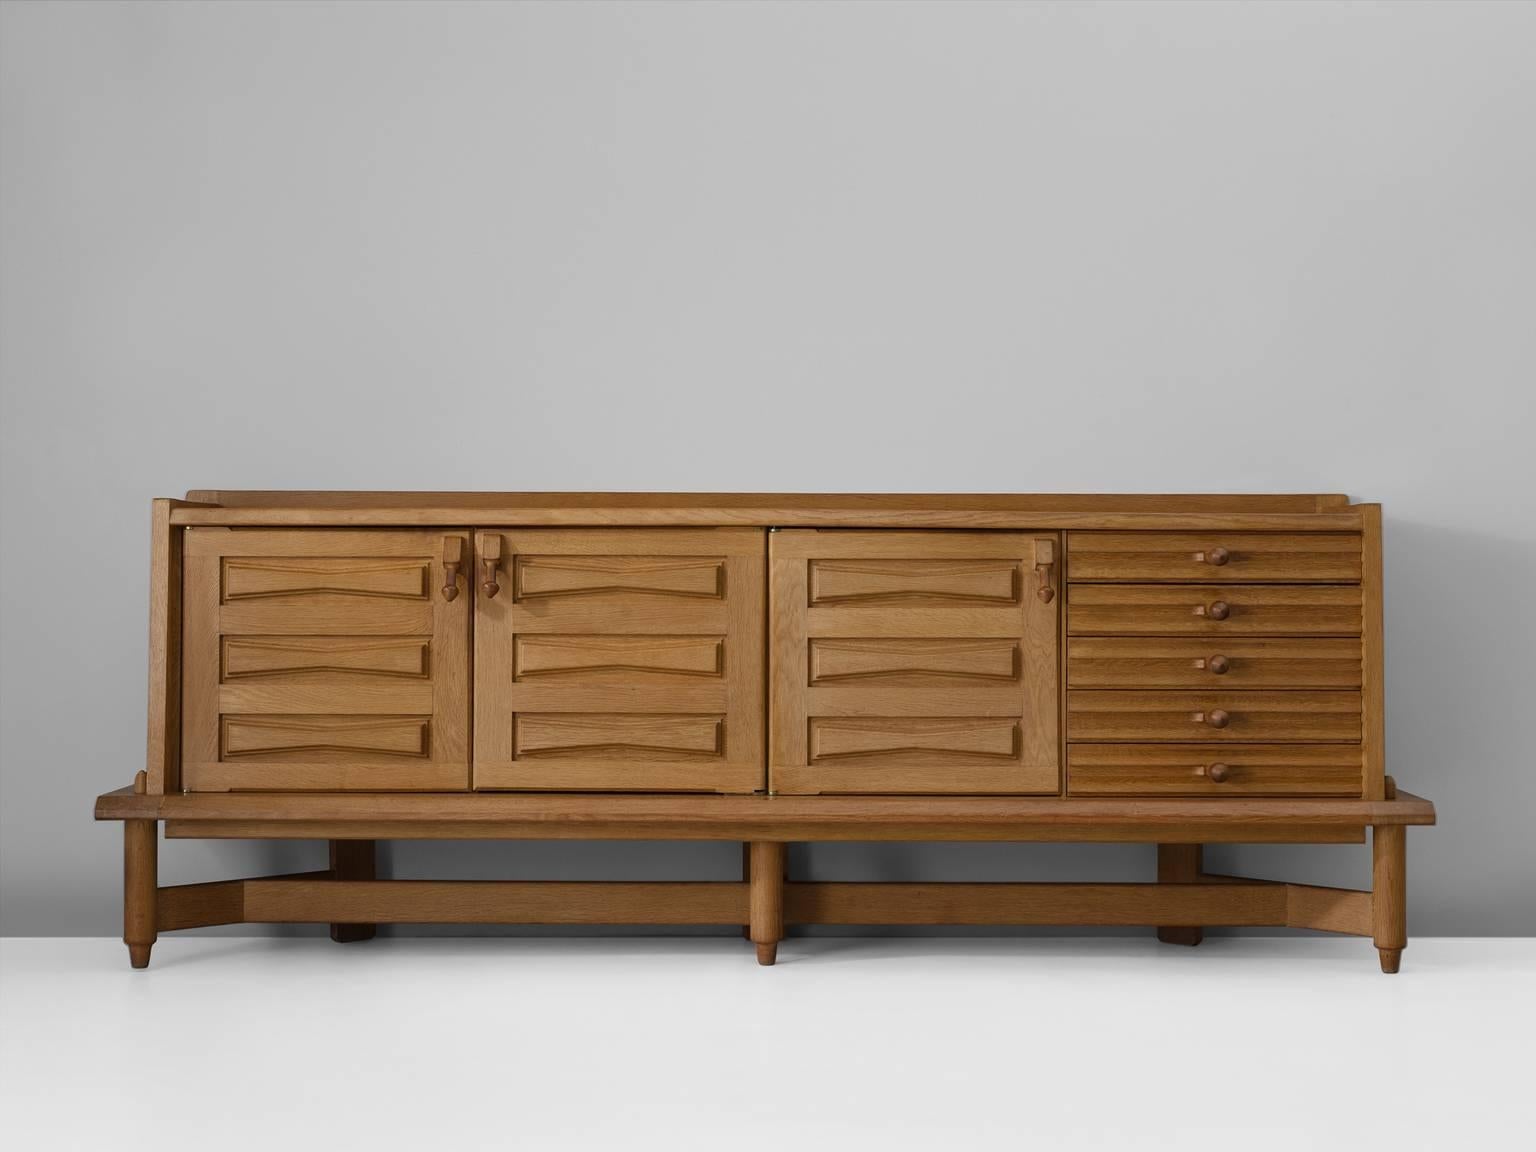 Credenza 'Saint-Ve´ran', in oak and ceramic, by Guillerme et Chambron for Votre Maison, France 1960s. 

Characteristic sideboard in solid oak. This cabinet holds the characteristics of the French designer duo Jacques Chambron (1914-2001) and